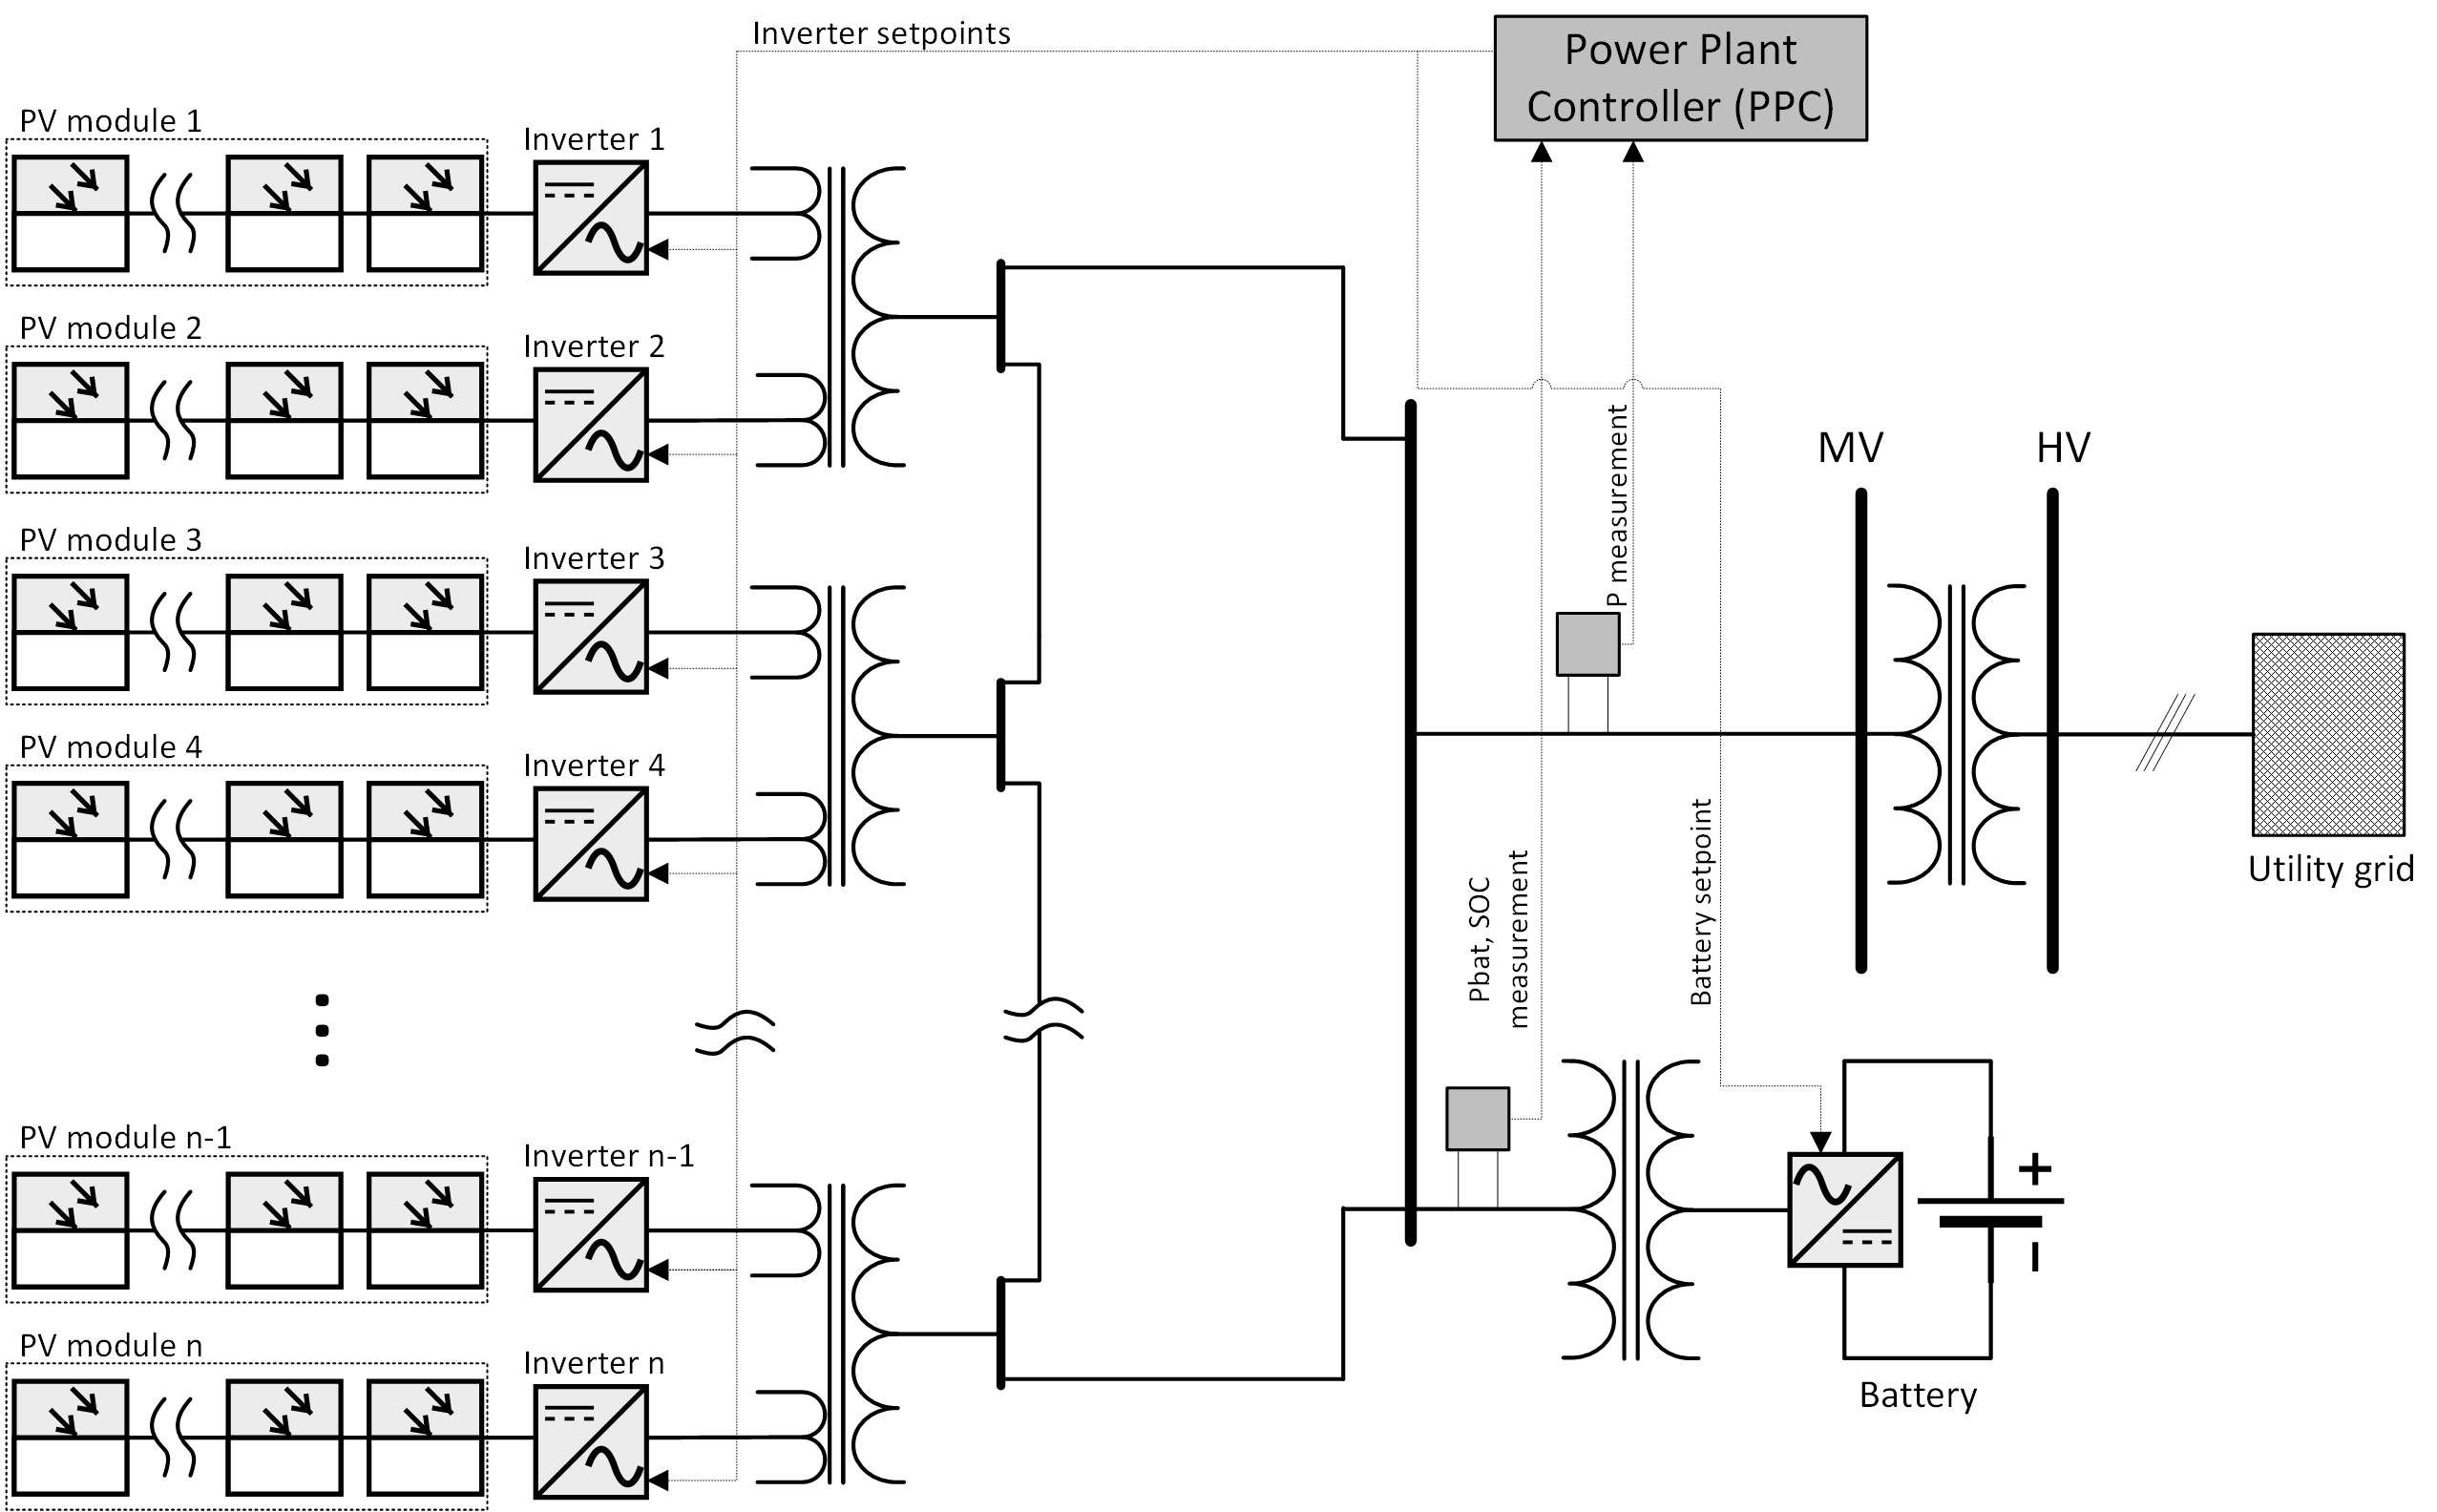 visio electrical engineering shapes free download